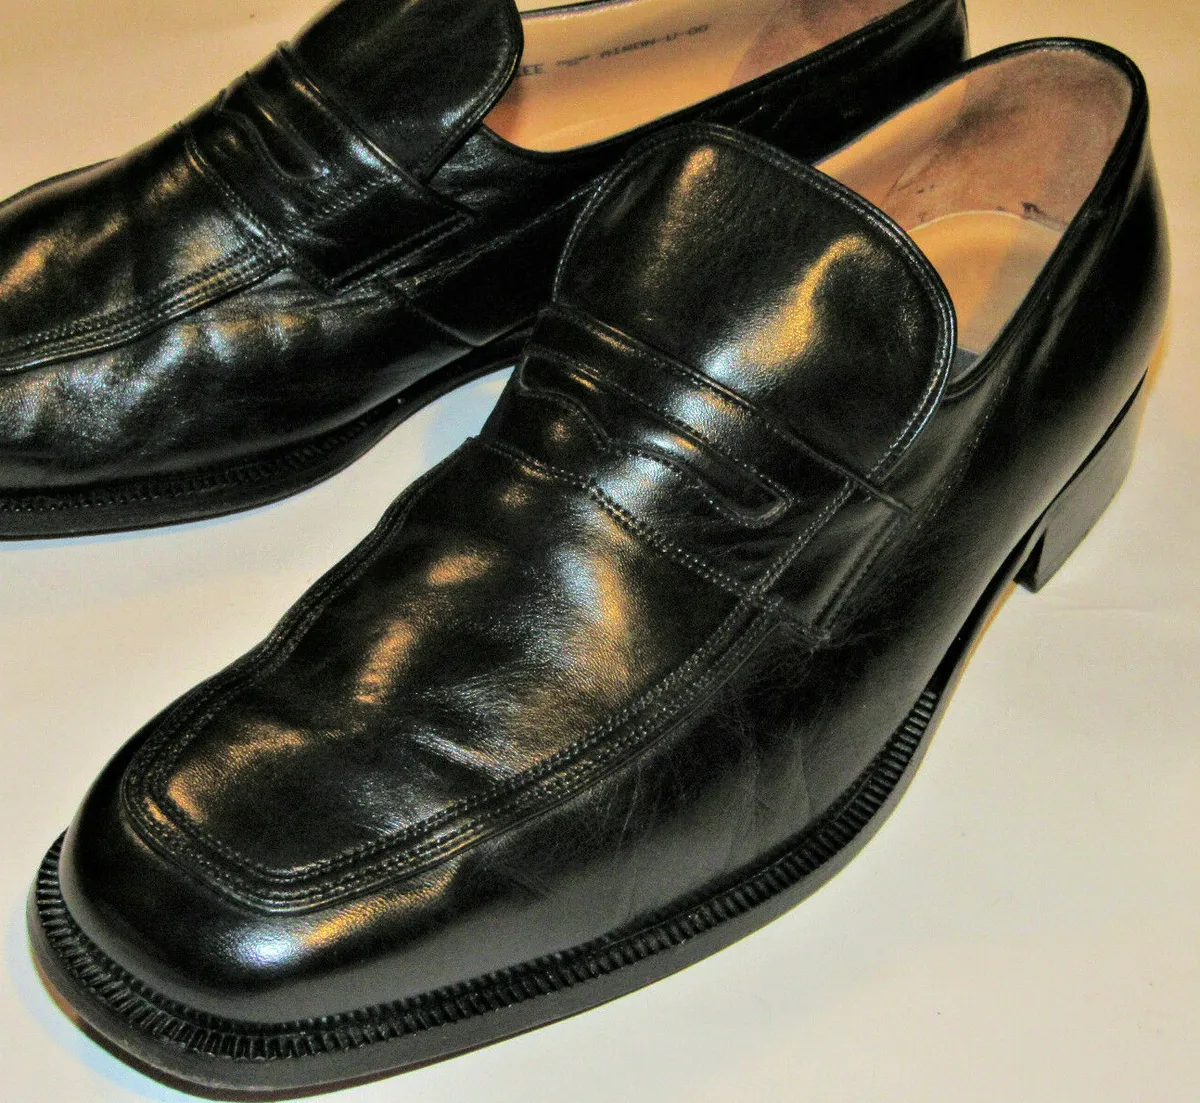 MEN'S BALLY BLACK LEATHER LOAFERS/SHOES! GREAT SHAPE! MADE IN SWITZERLAND  10 EEE